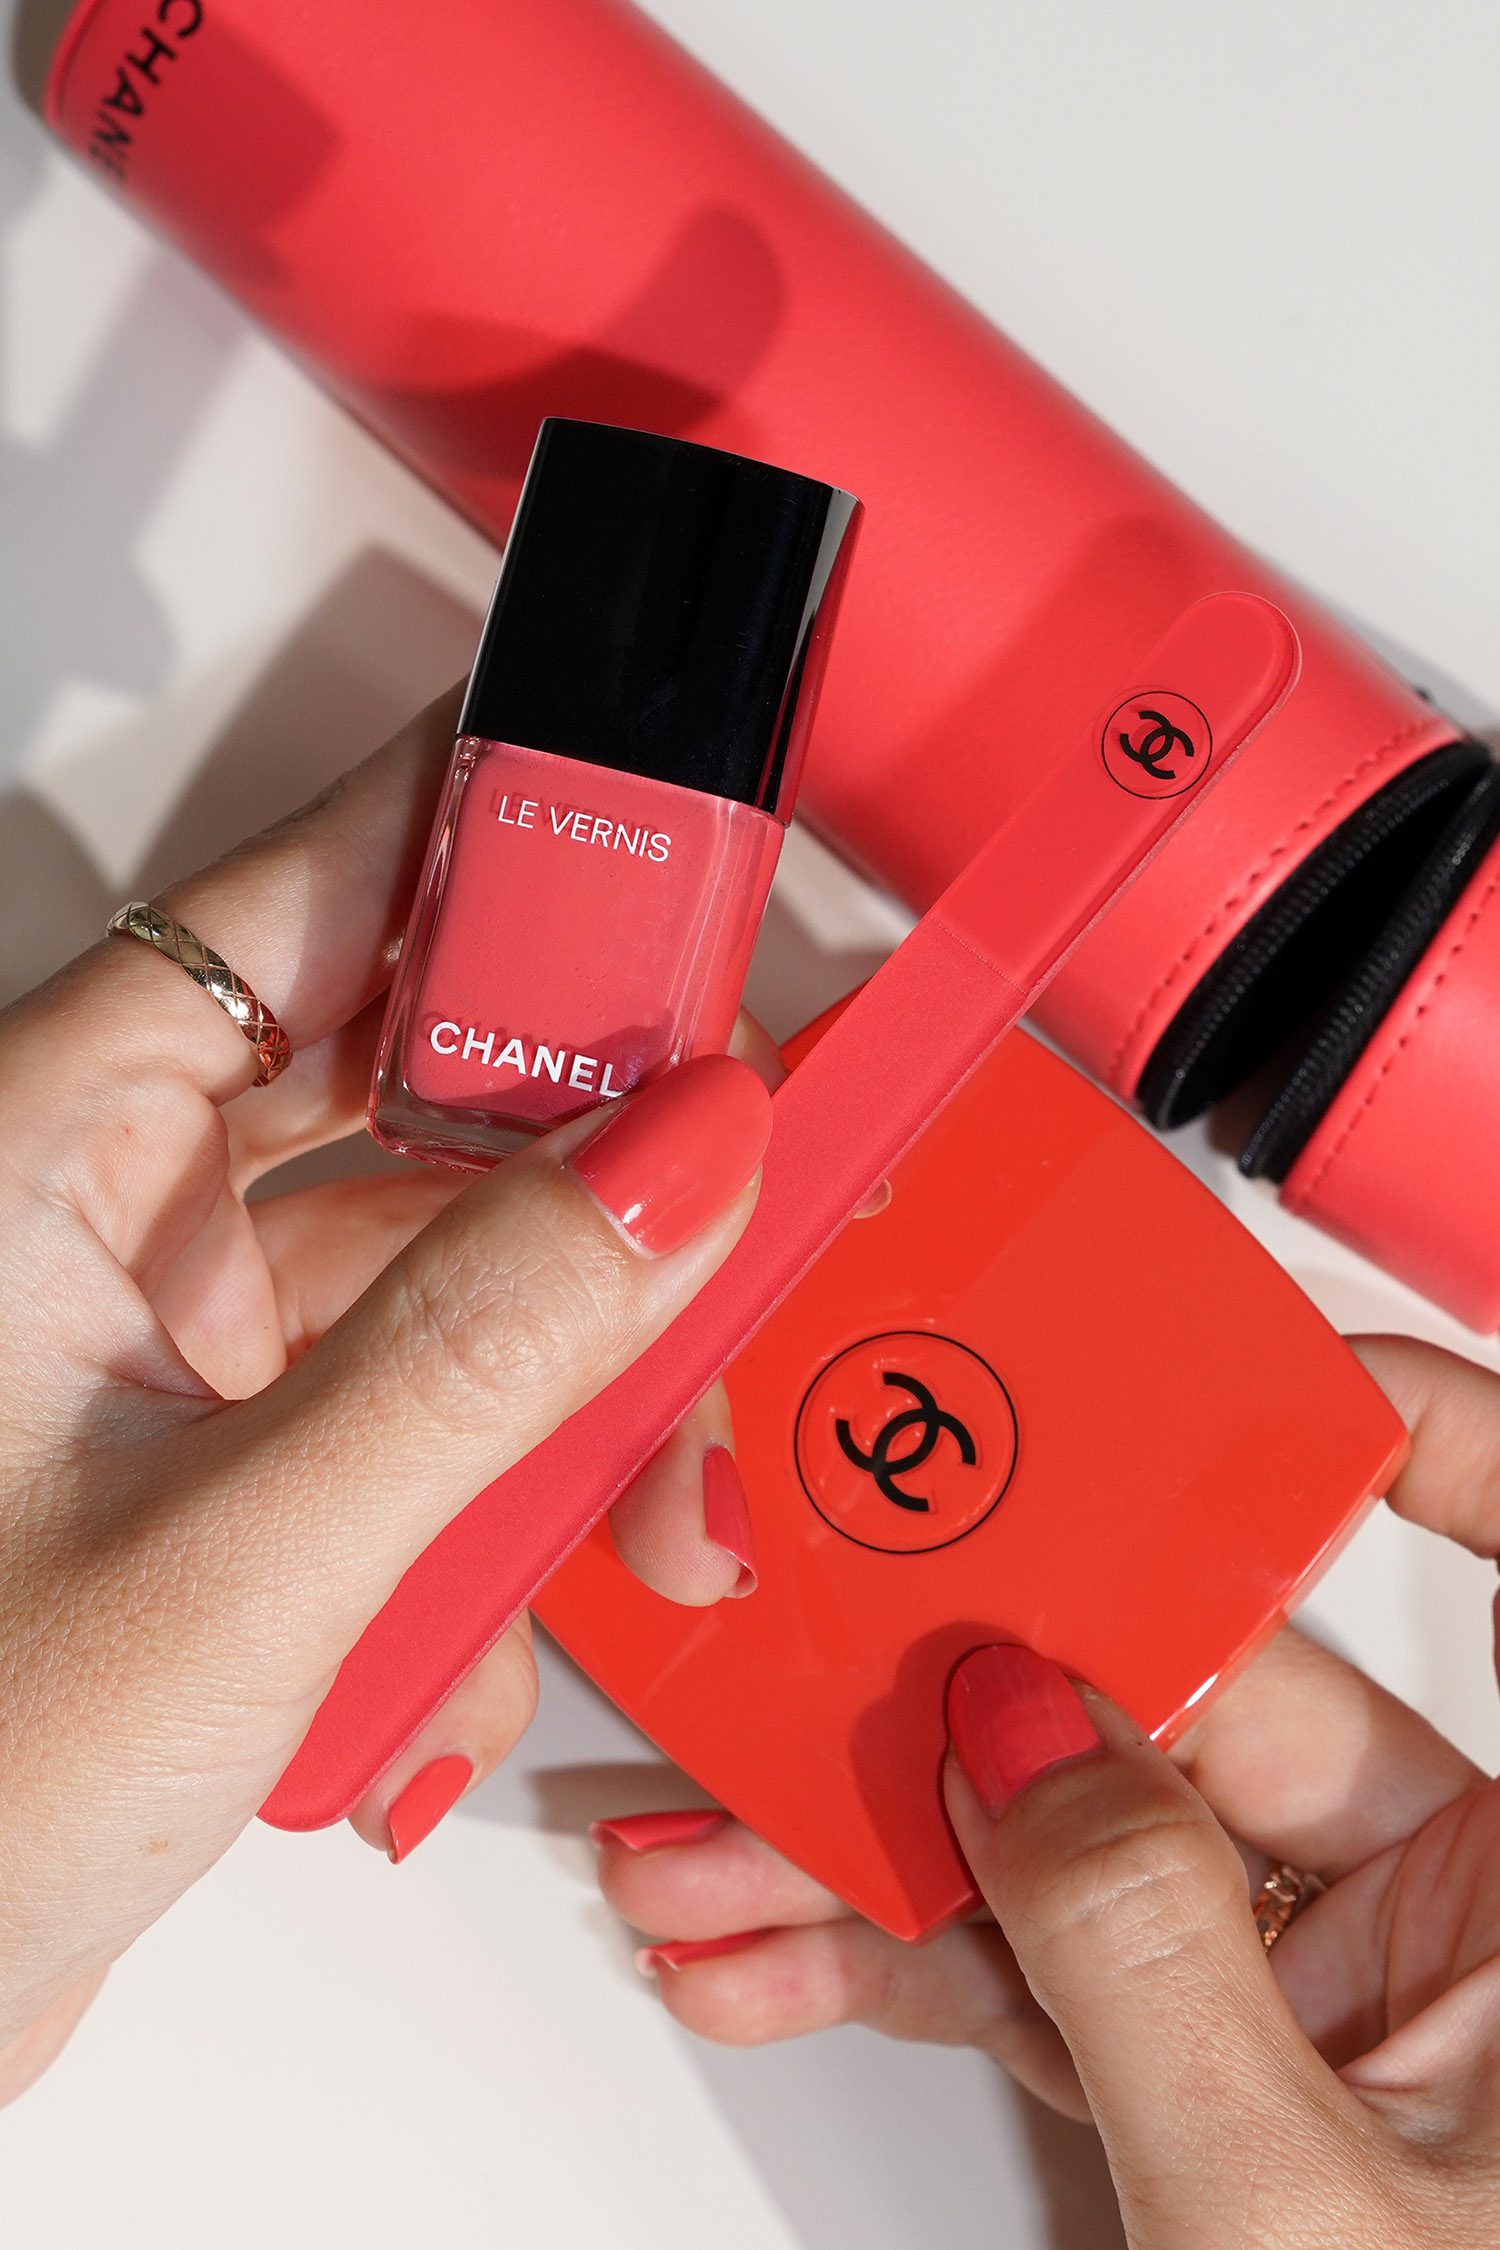 Chanel Codes Couleur - The Beauty Look Book